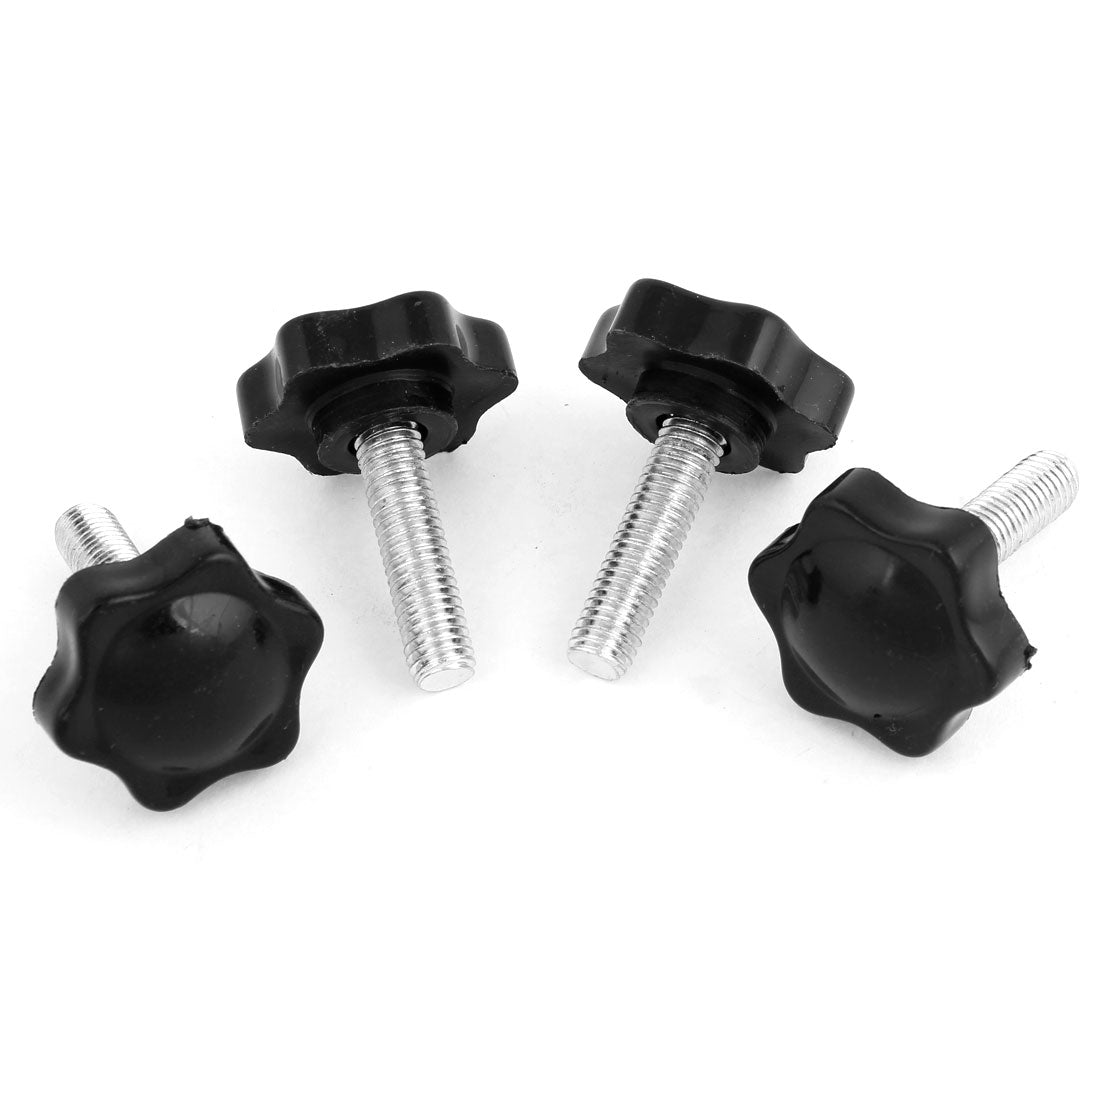 uxcell Uxcell 32mm Star Head Dia Replacement 8mm x 30mm Clamping Screw Knob Grip 4 Pcs